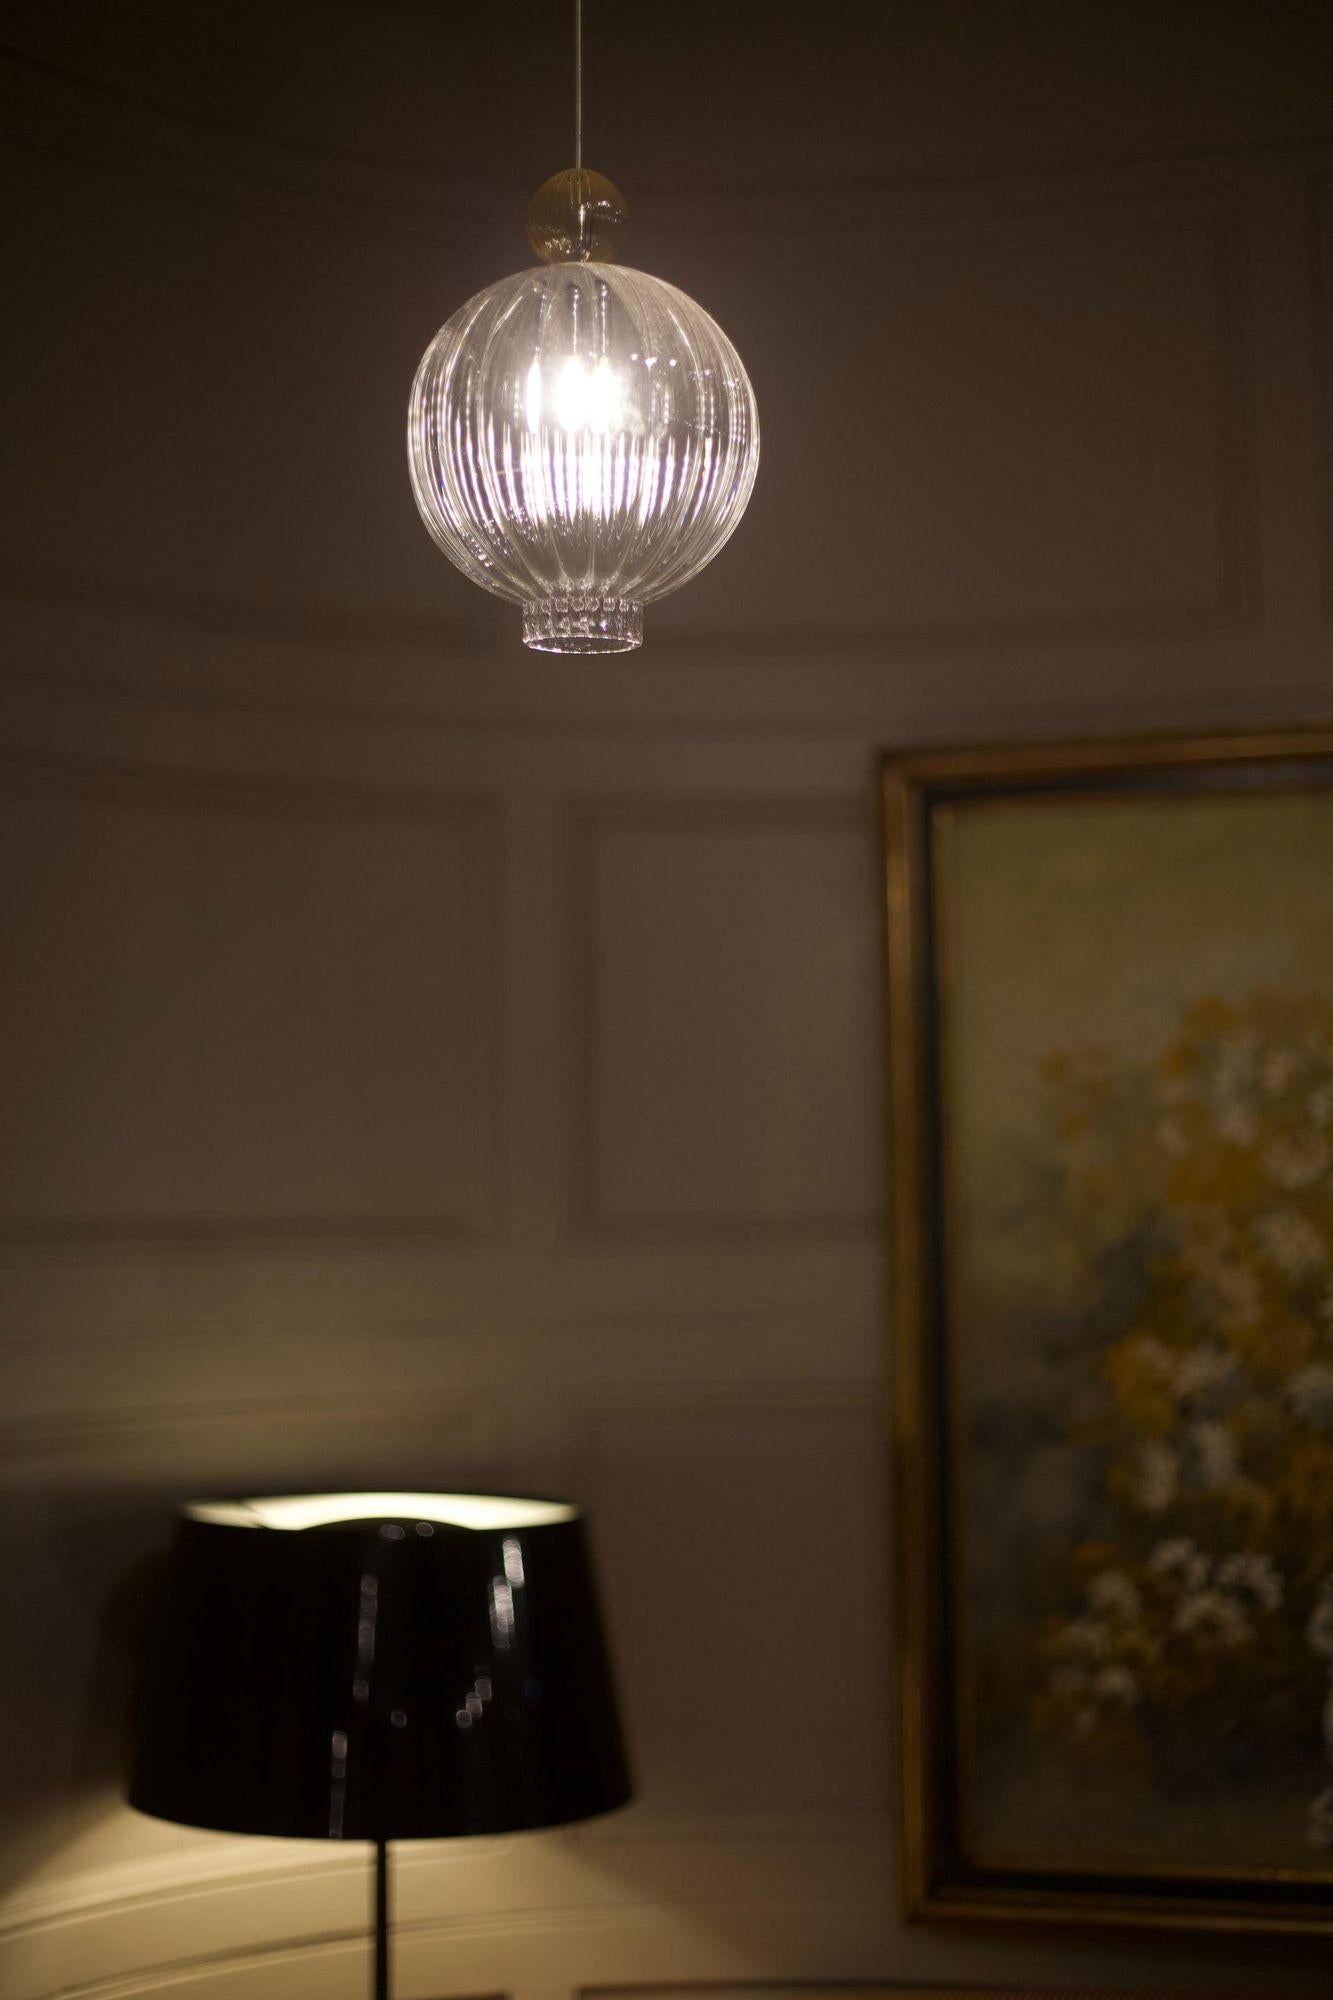 These are the glass Silhouette pendant lights made entirely by hand in Italy. The glass shade is clear with lined details and an amber coloured glass ball on top. They cast a beautiful even light in a space. Great as single pendant lights or used in